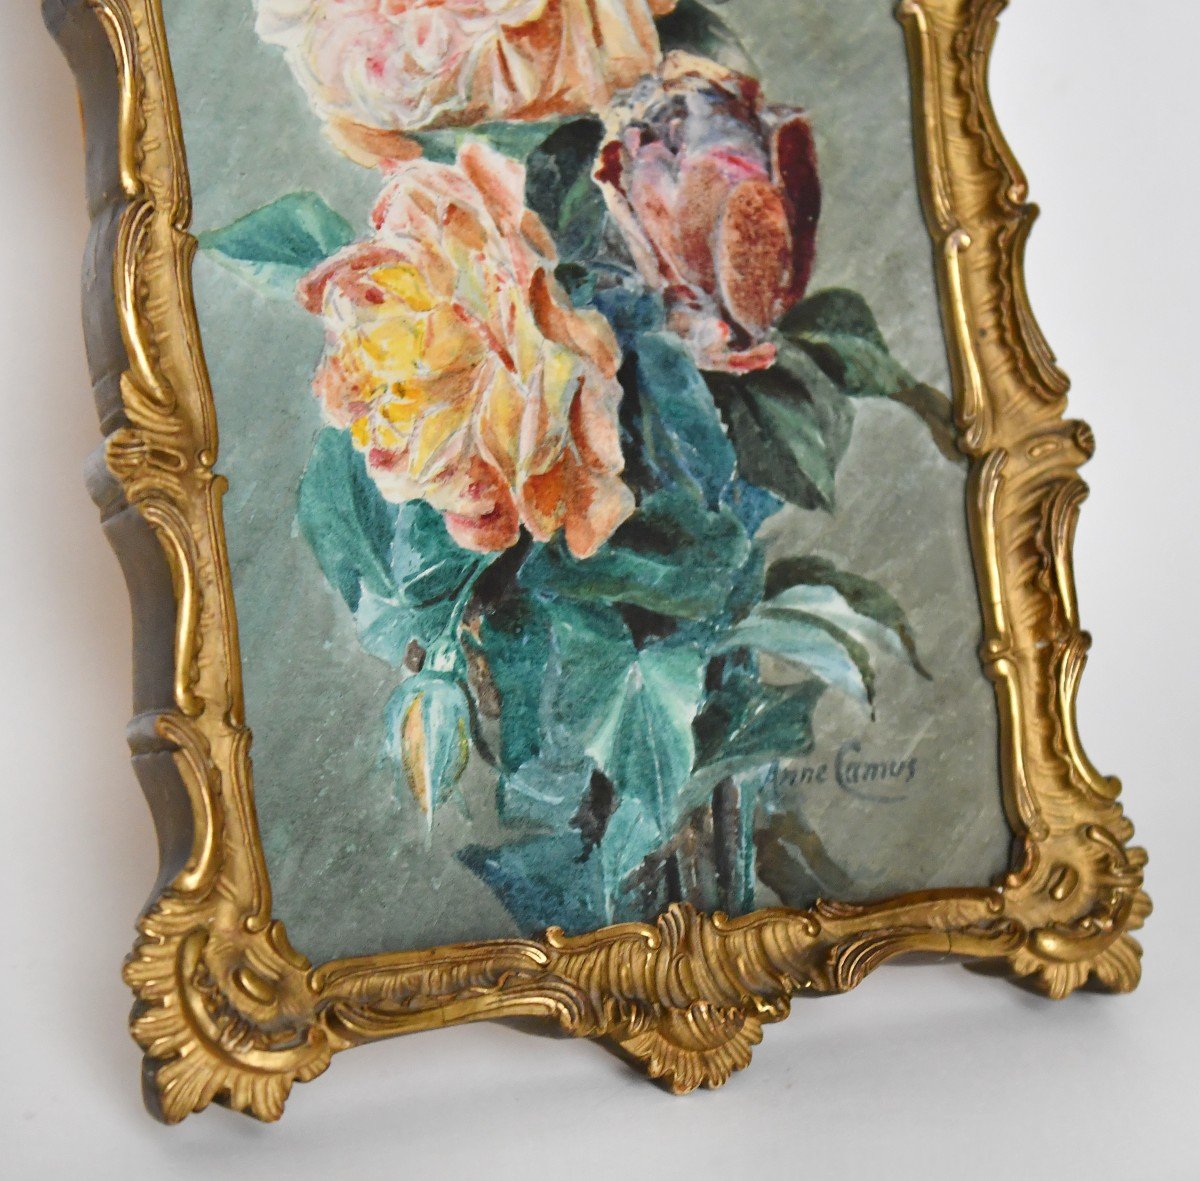 Anne Camus (19th Century School) "roses And Carnations" Pair Of Watercolors -photo-3